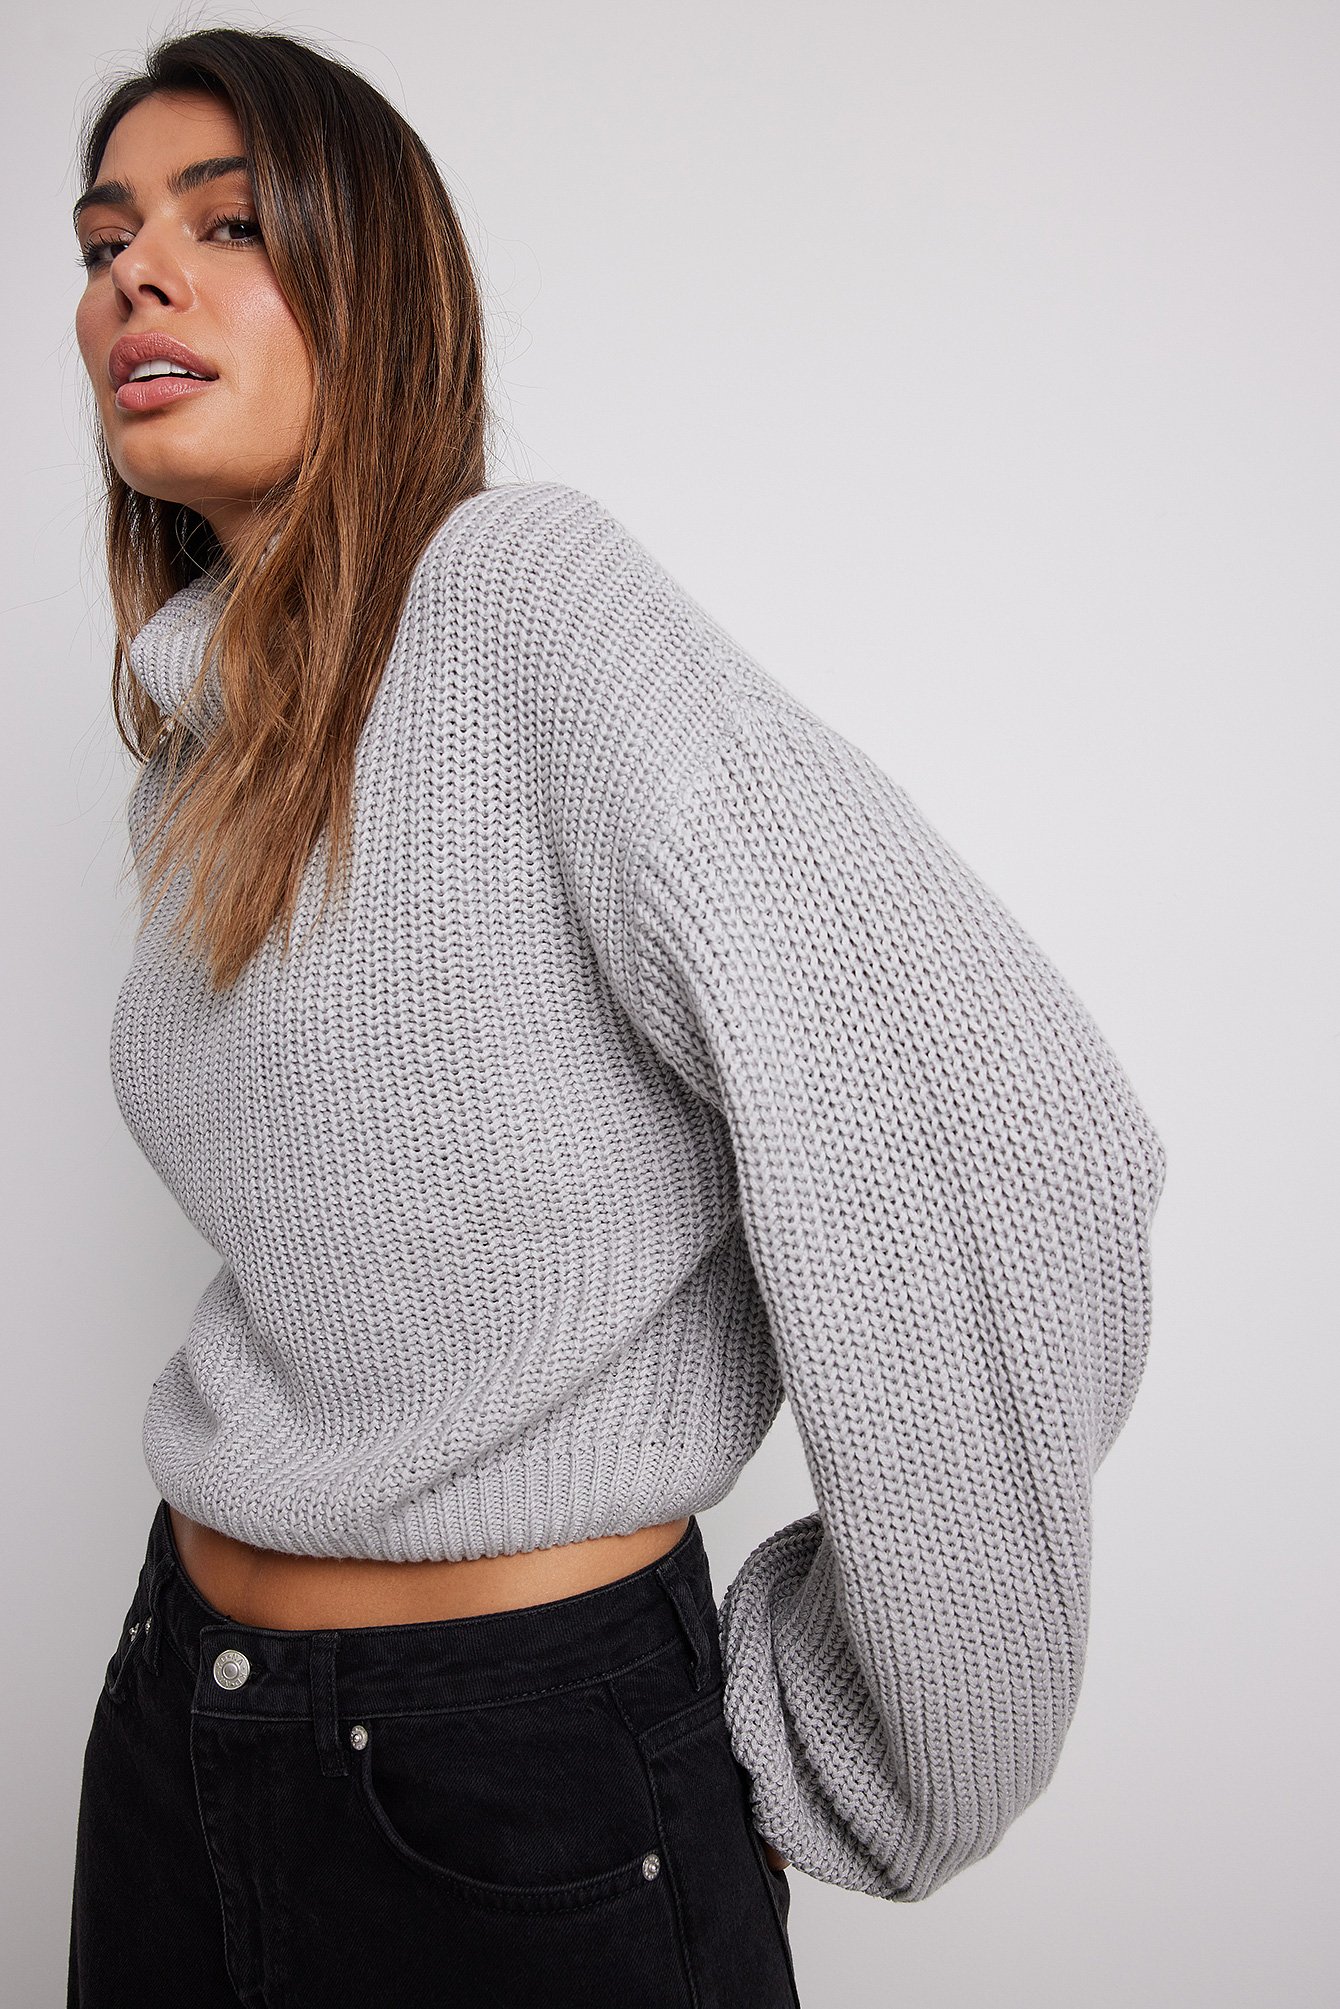 Tahari Wide Check High Neck Jumper in Grey Grey Womens Clothing Jumpers and knitwear Turtlenecks 